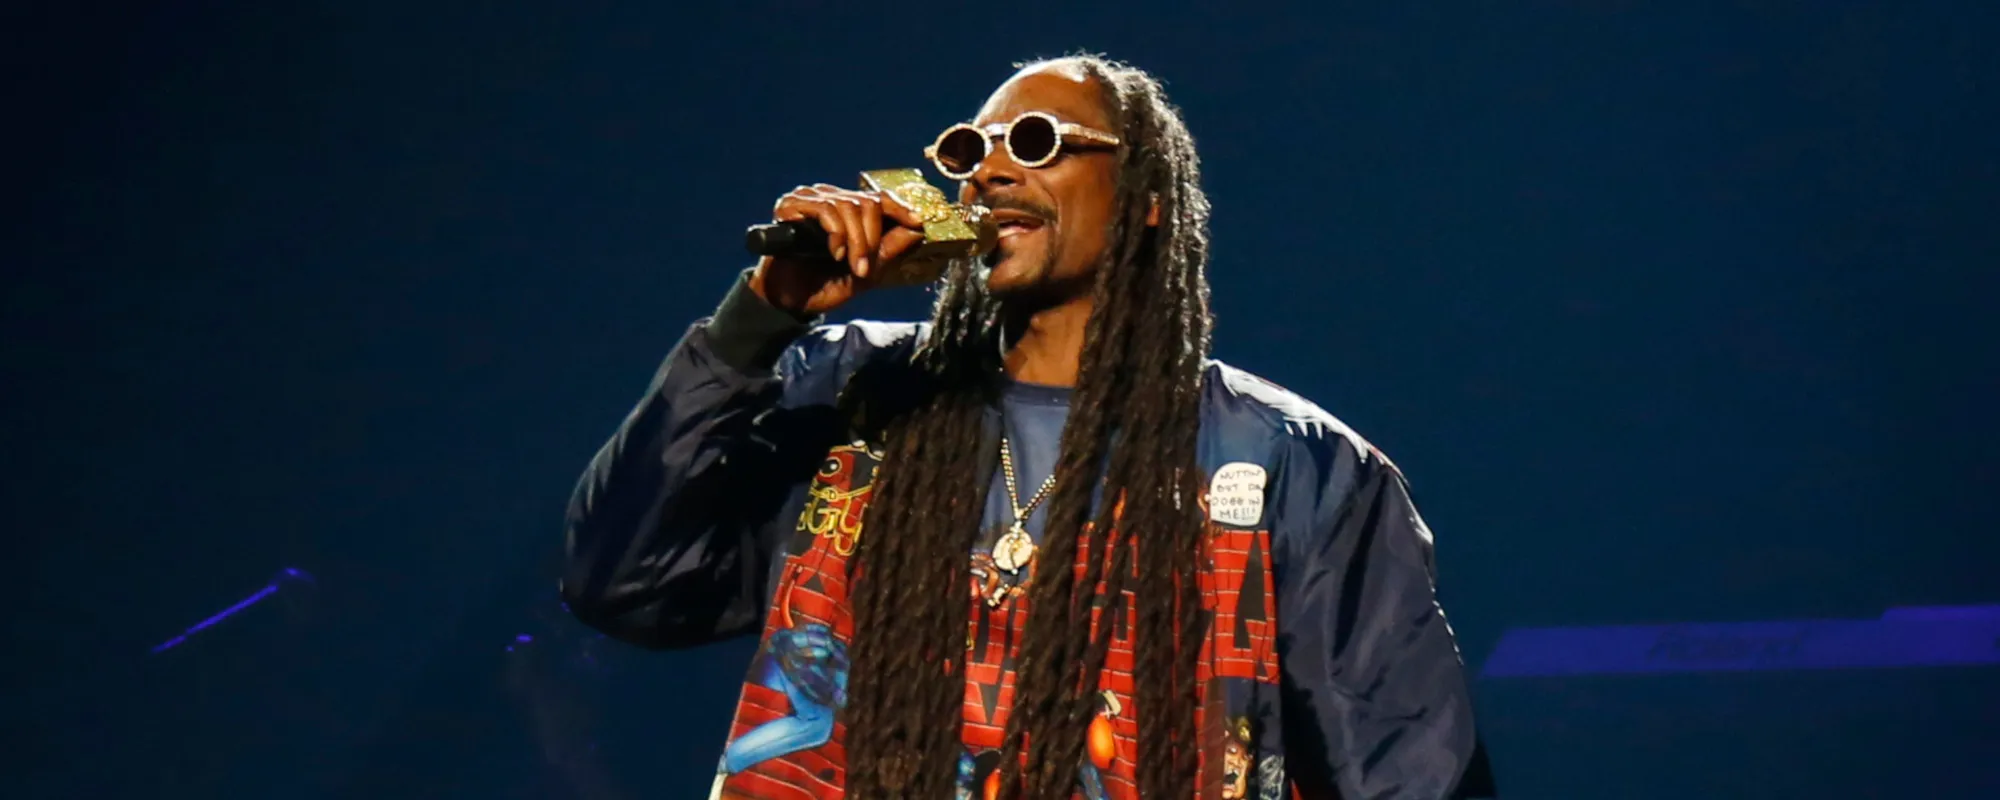 Want To Be Snoop Dogg’s Virtual Neighbor? That’ll Cost $450,000